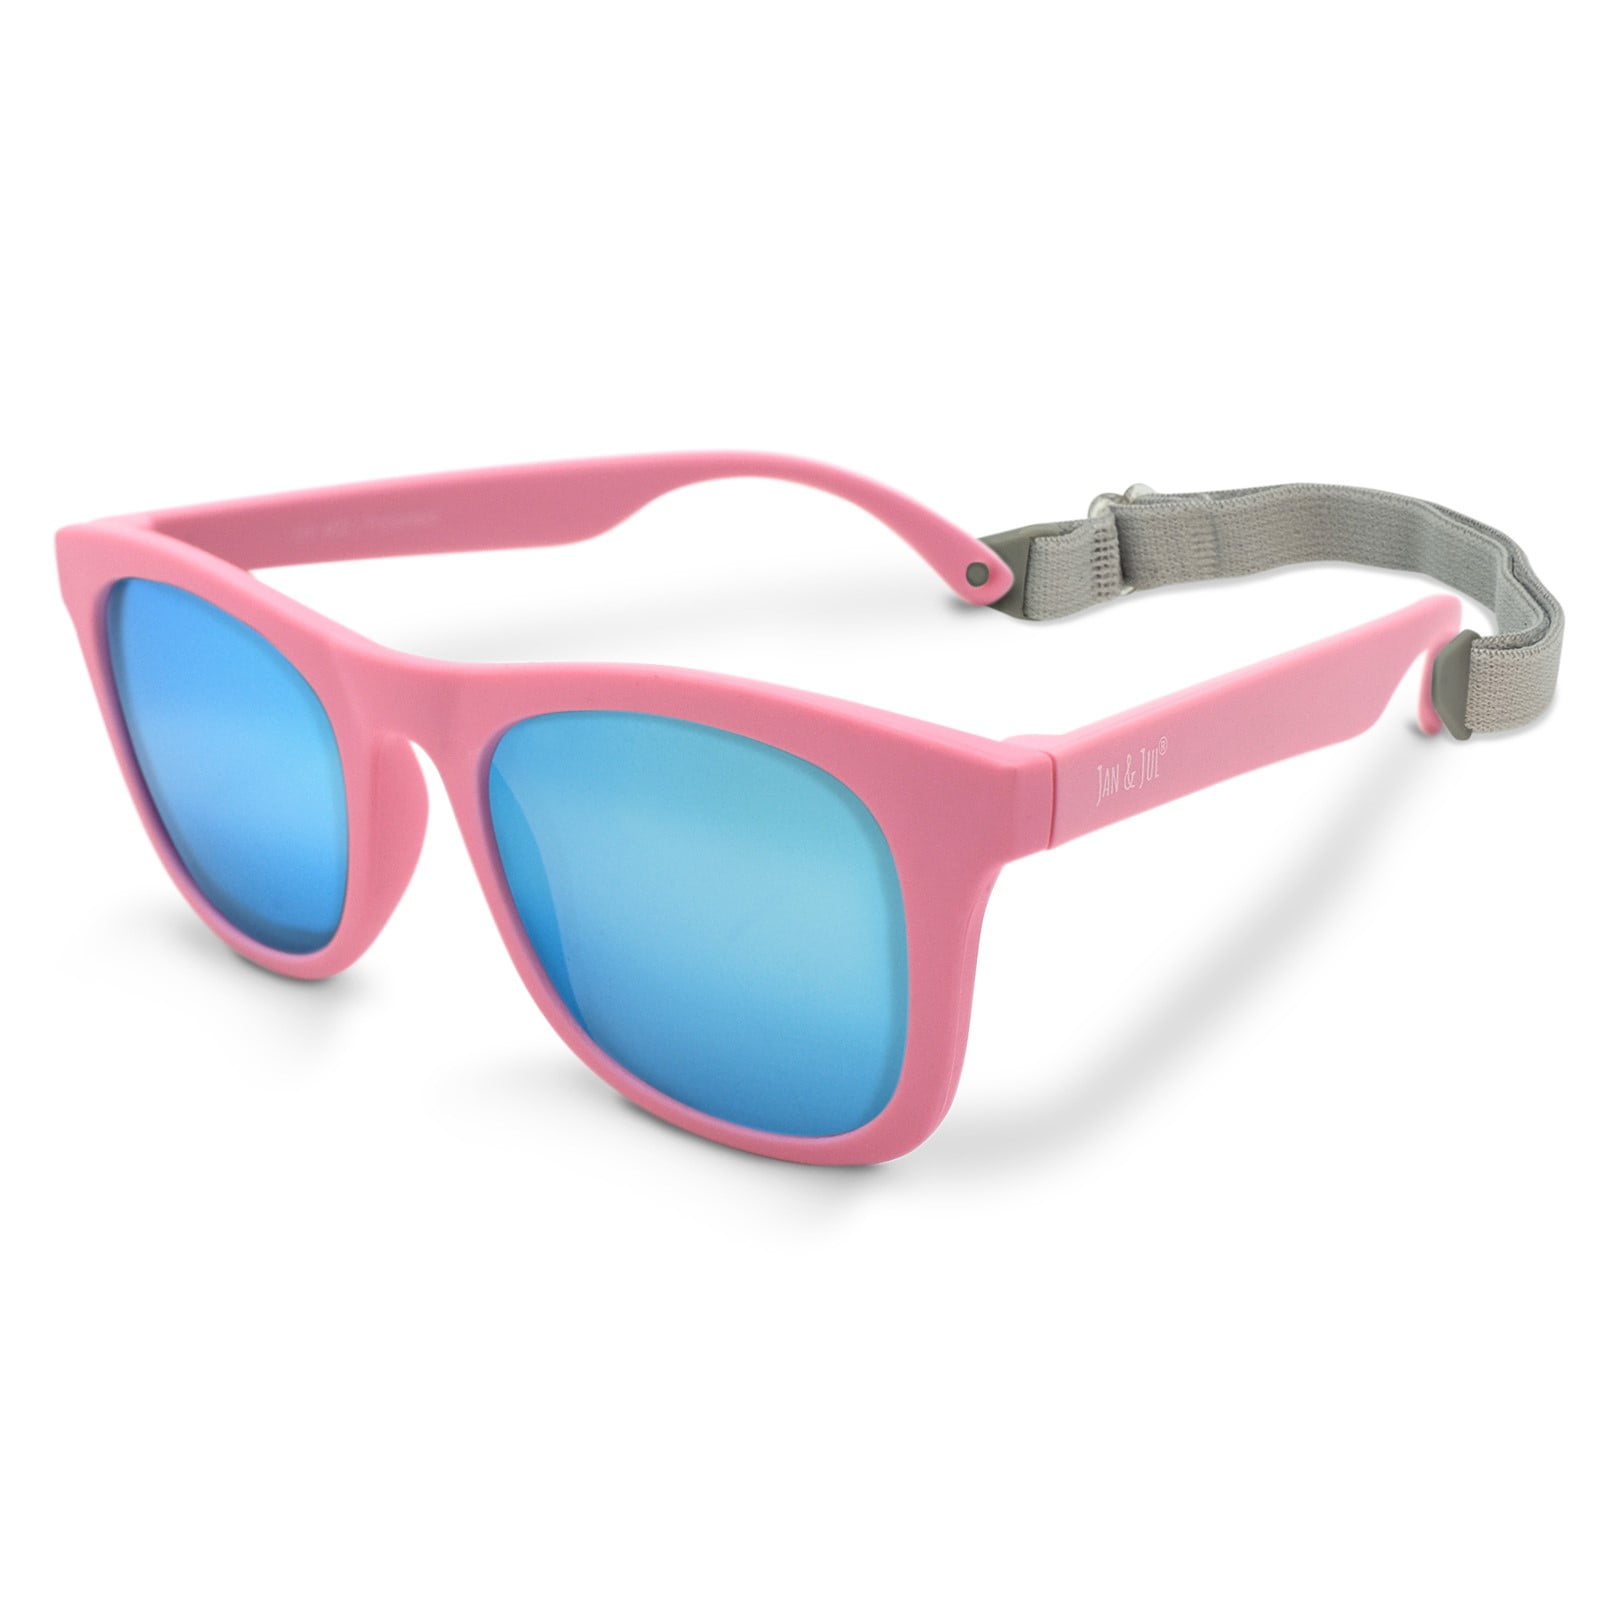 Foster Grant Kids  For ages 3 Sunglasses 100% Uva/Uvb Protection PINK NEW